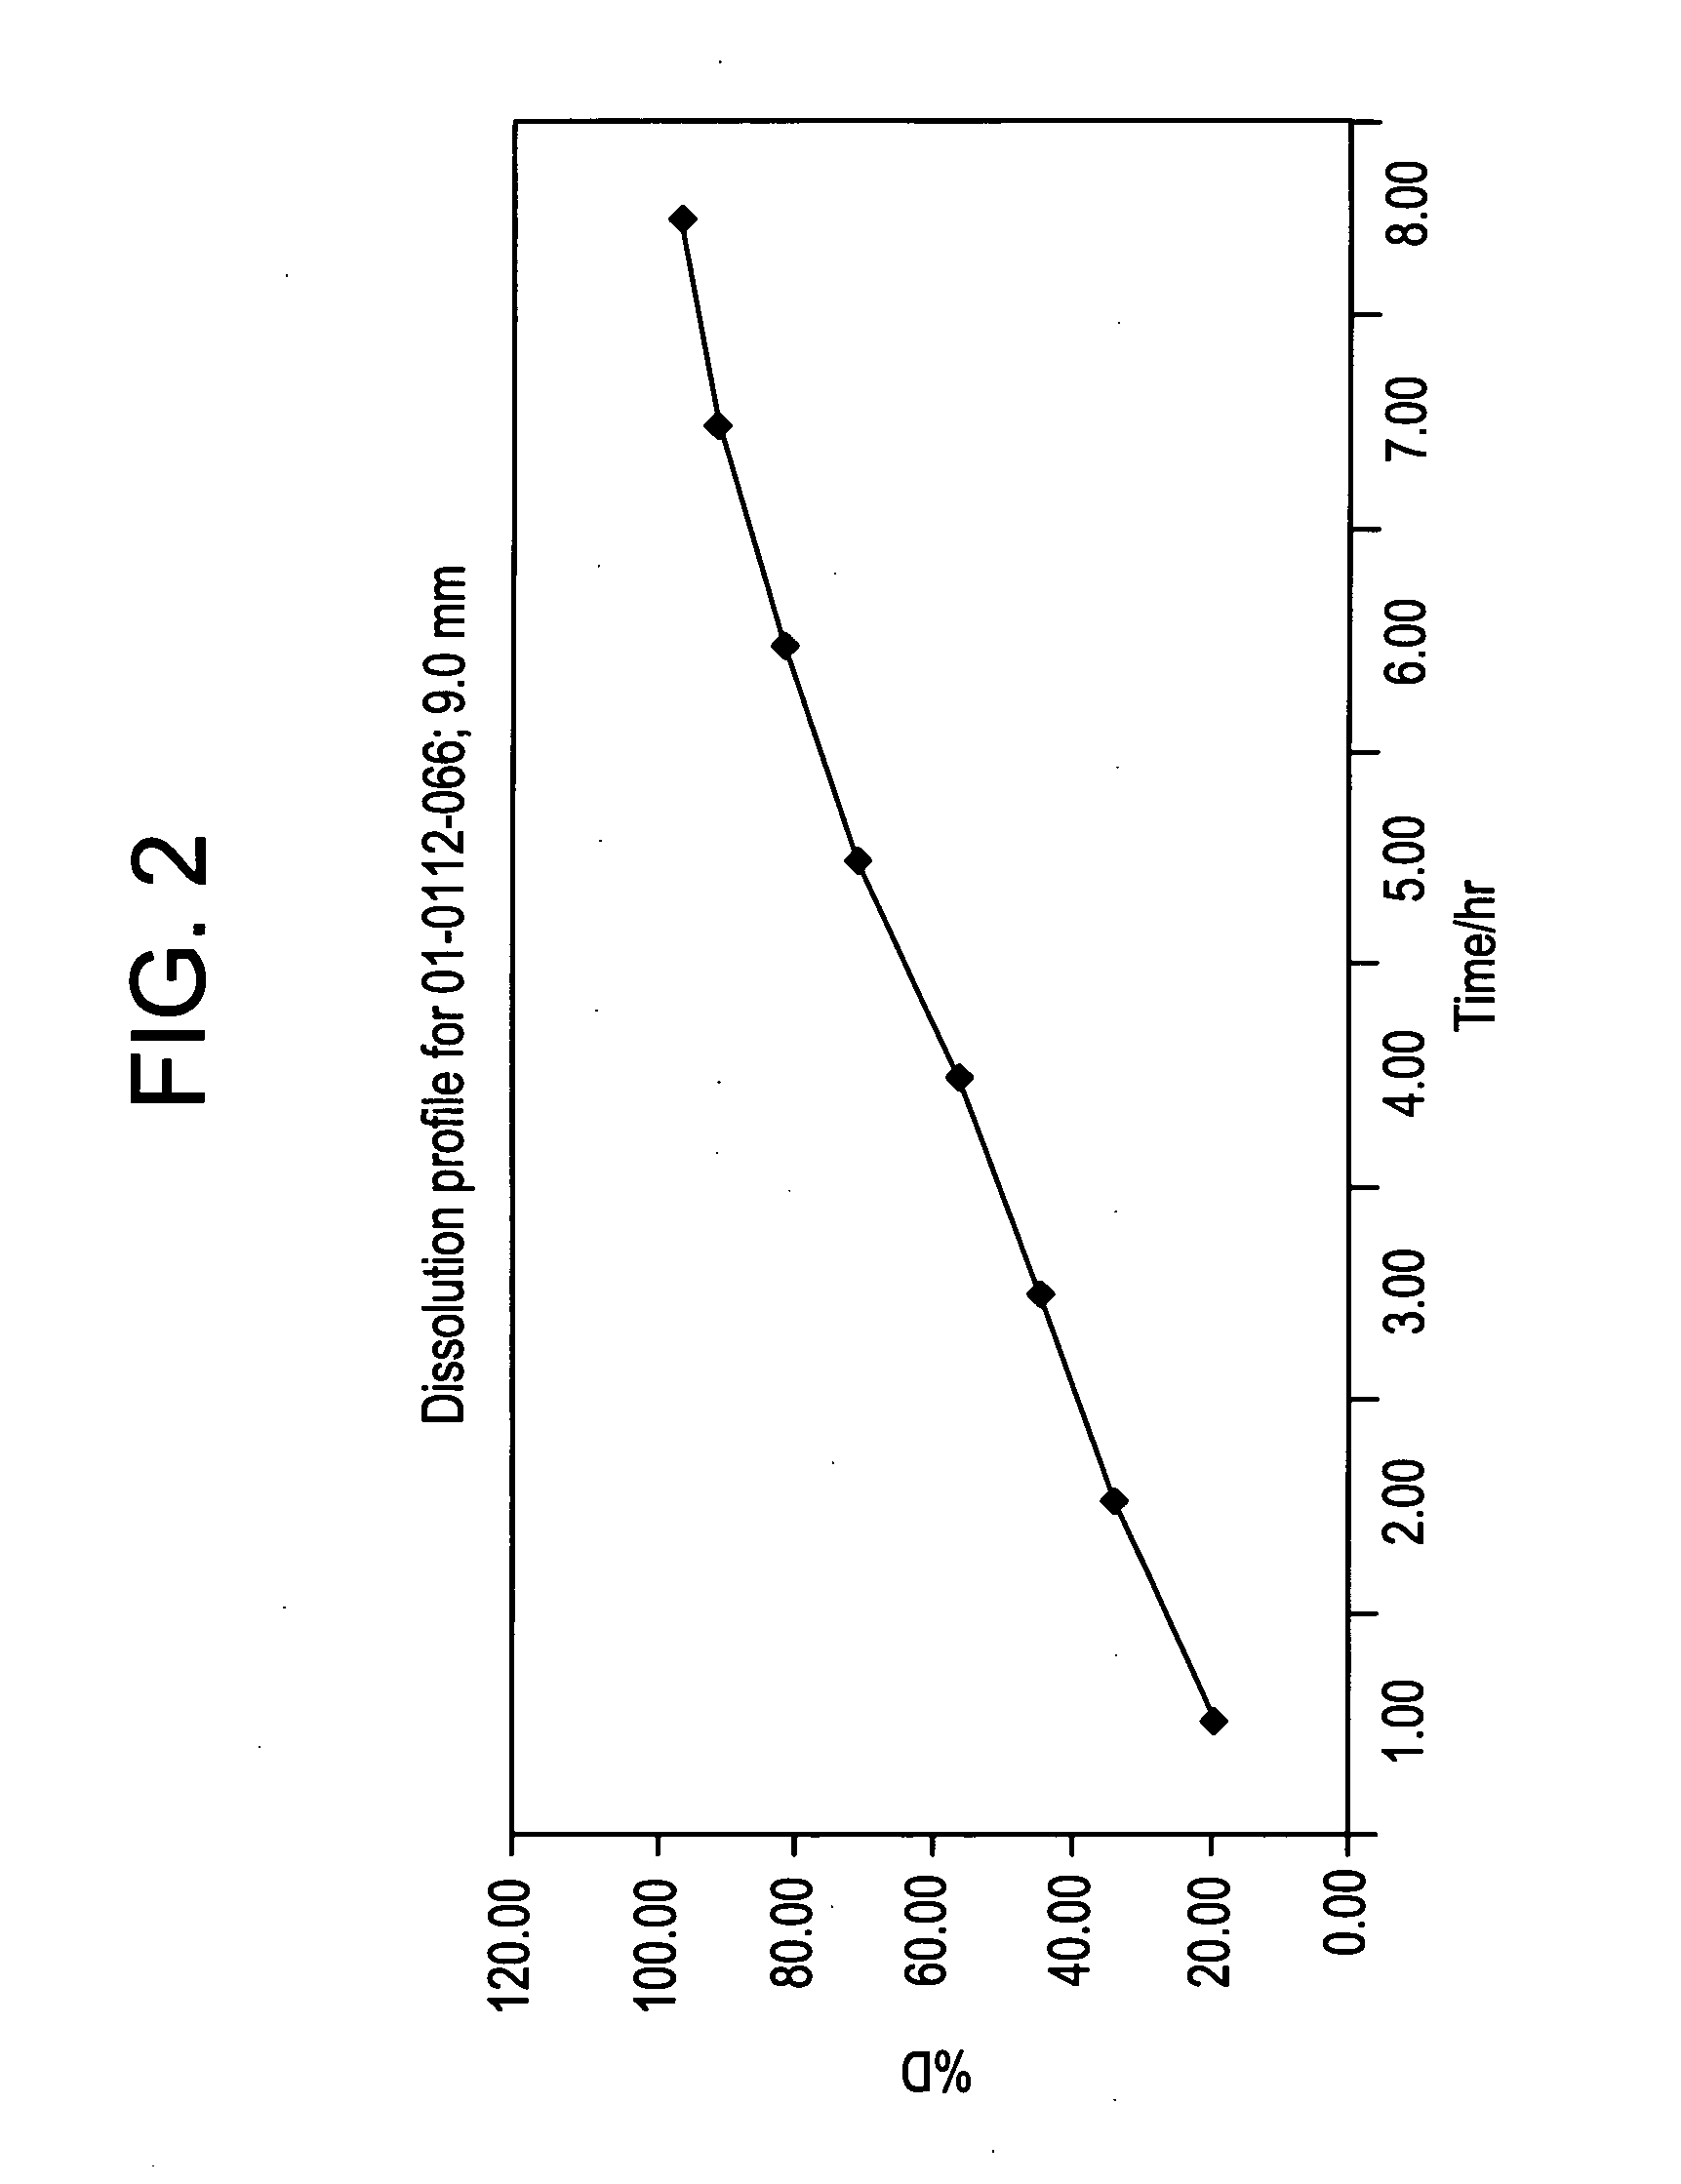 Morphine polymer release system